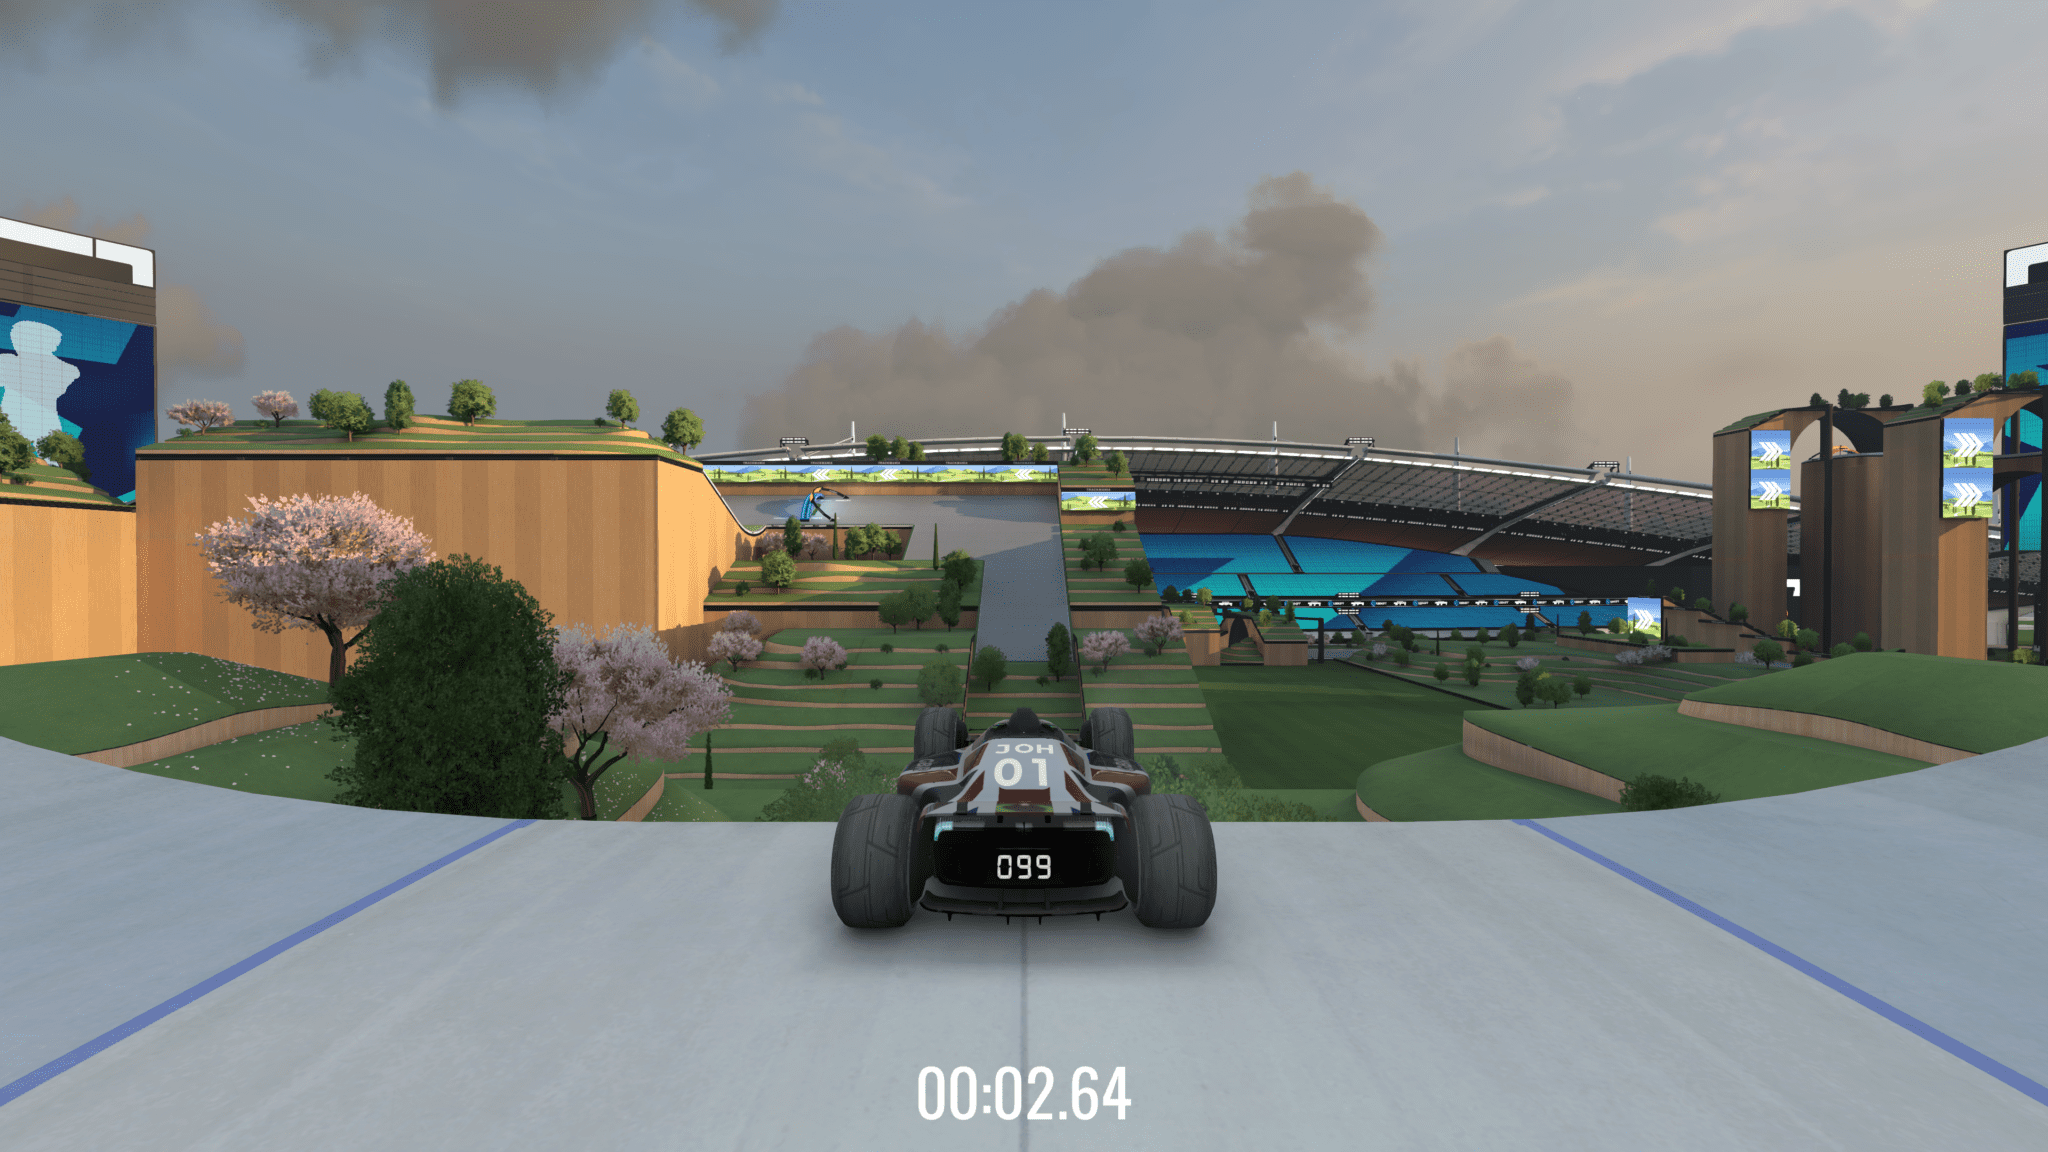 Trackmania’s Spring 2021 Campaign is now live Traxion